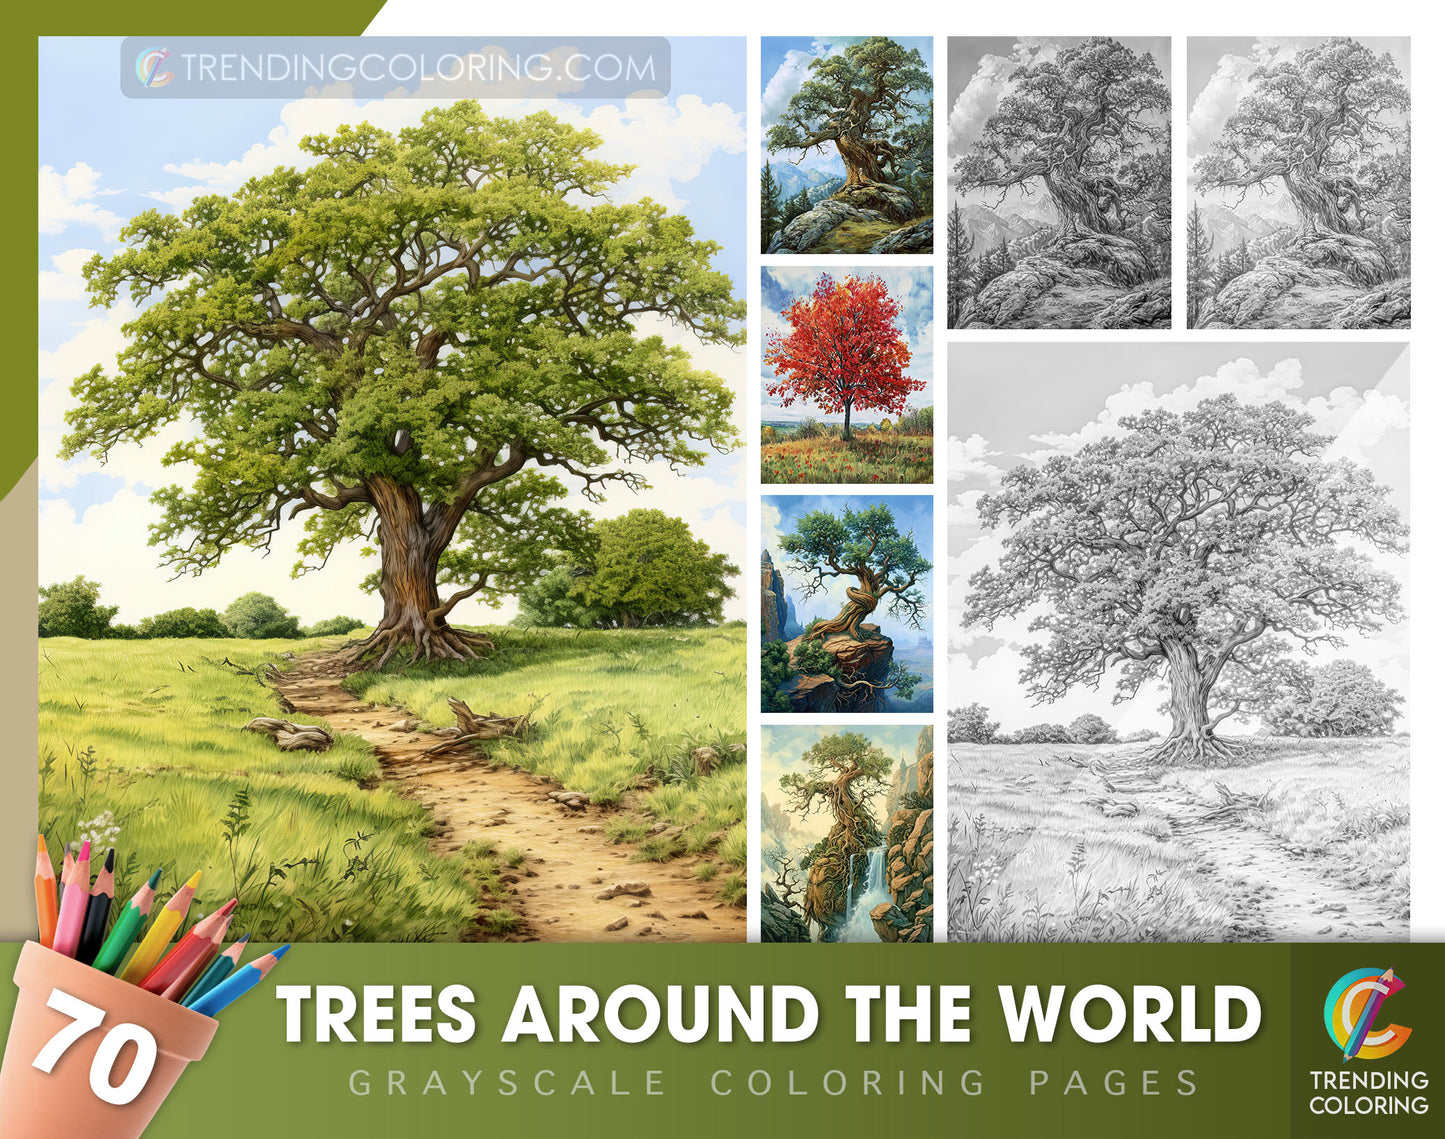 70 Trees Around The World Grayscale Coloring Pages - Instant Download - Printable Dark/Light